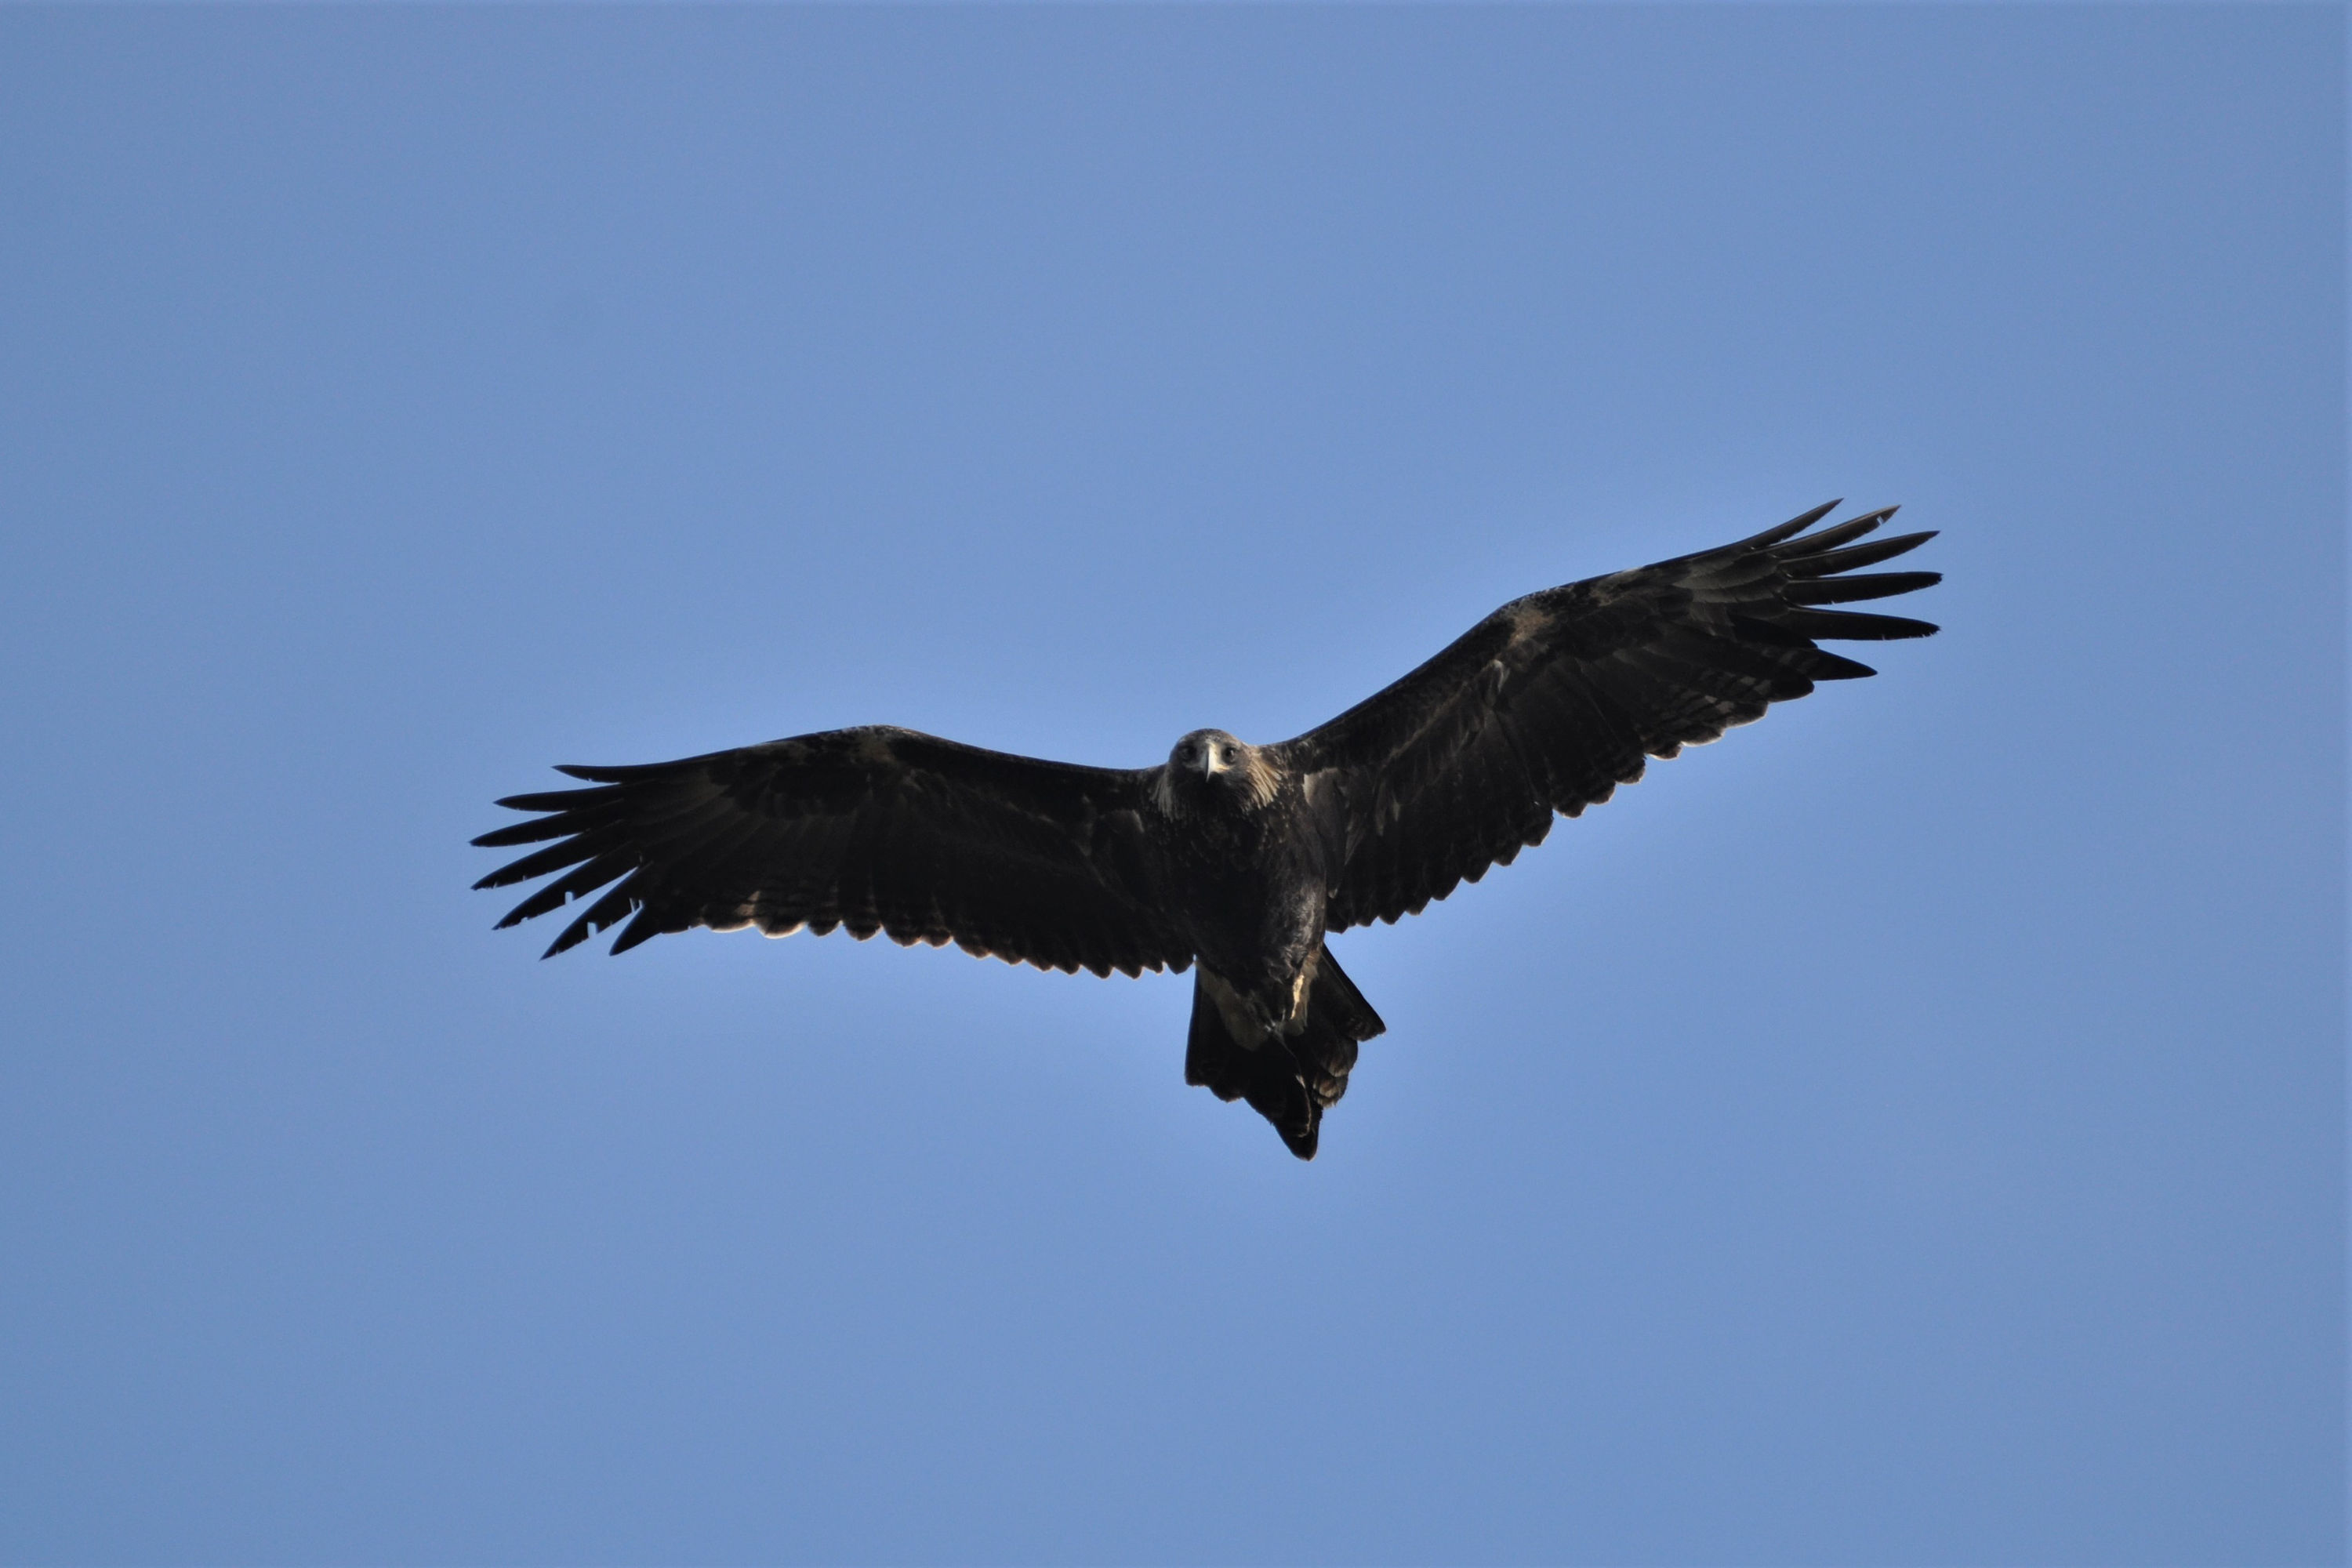 A wedge-tailed eagle flying above looks down at the photographer. It is very dark against the blue sky but we can just make out the pale nape of its neck, indicating that it is a younger bird. Photo: Stephen Anstee.